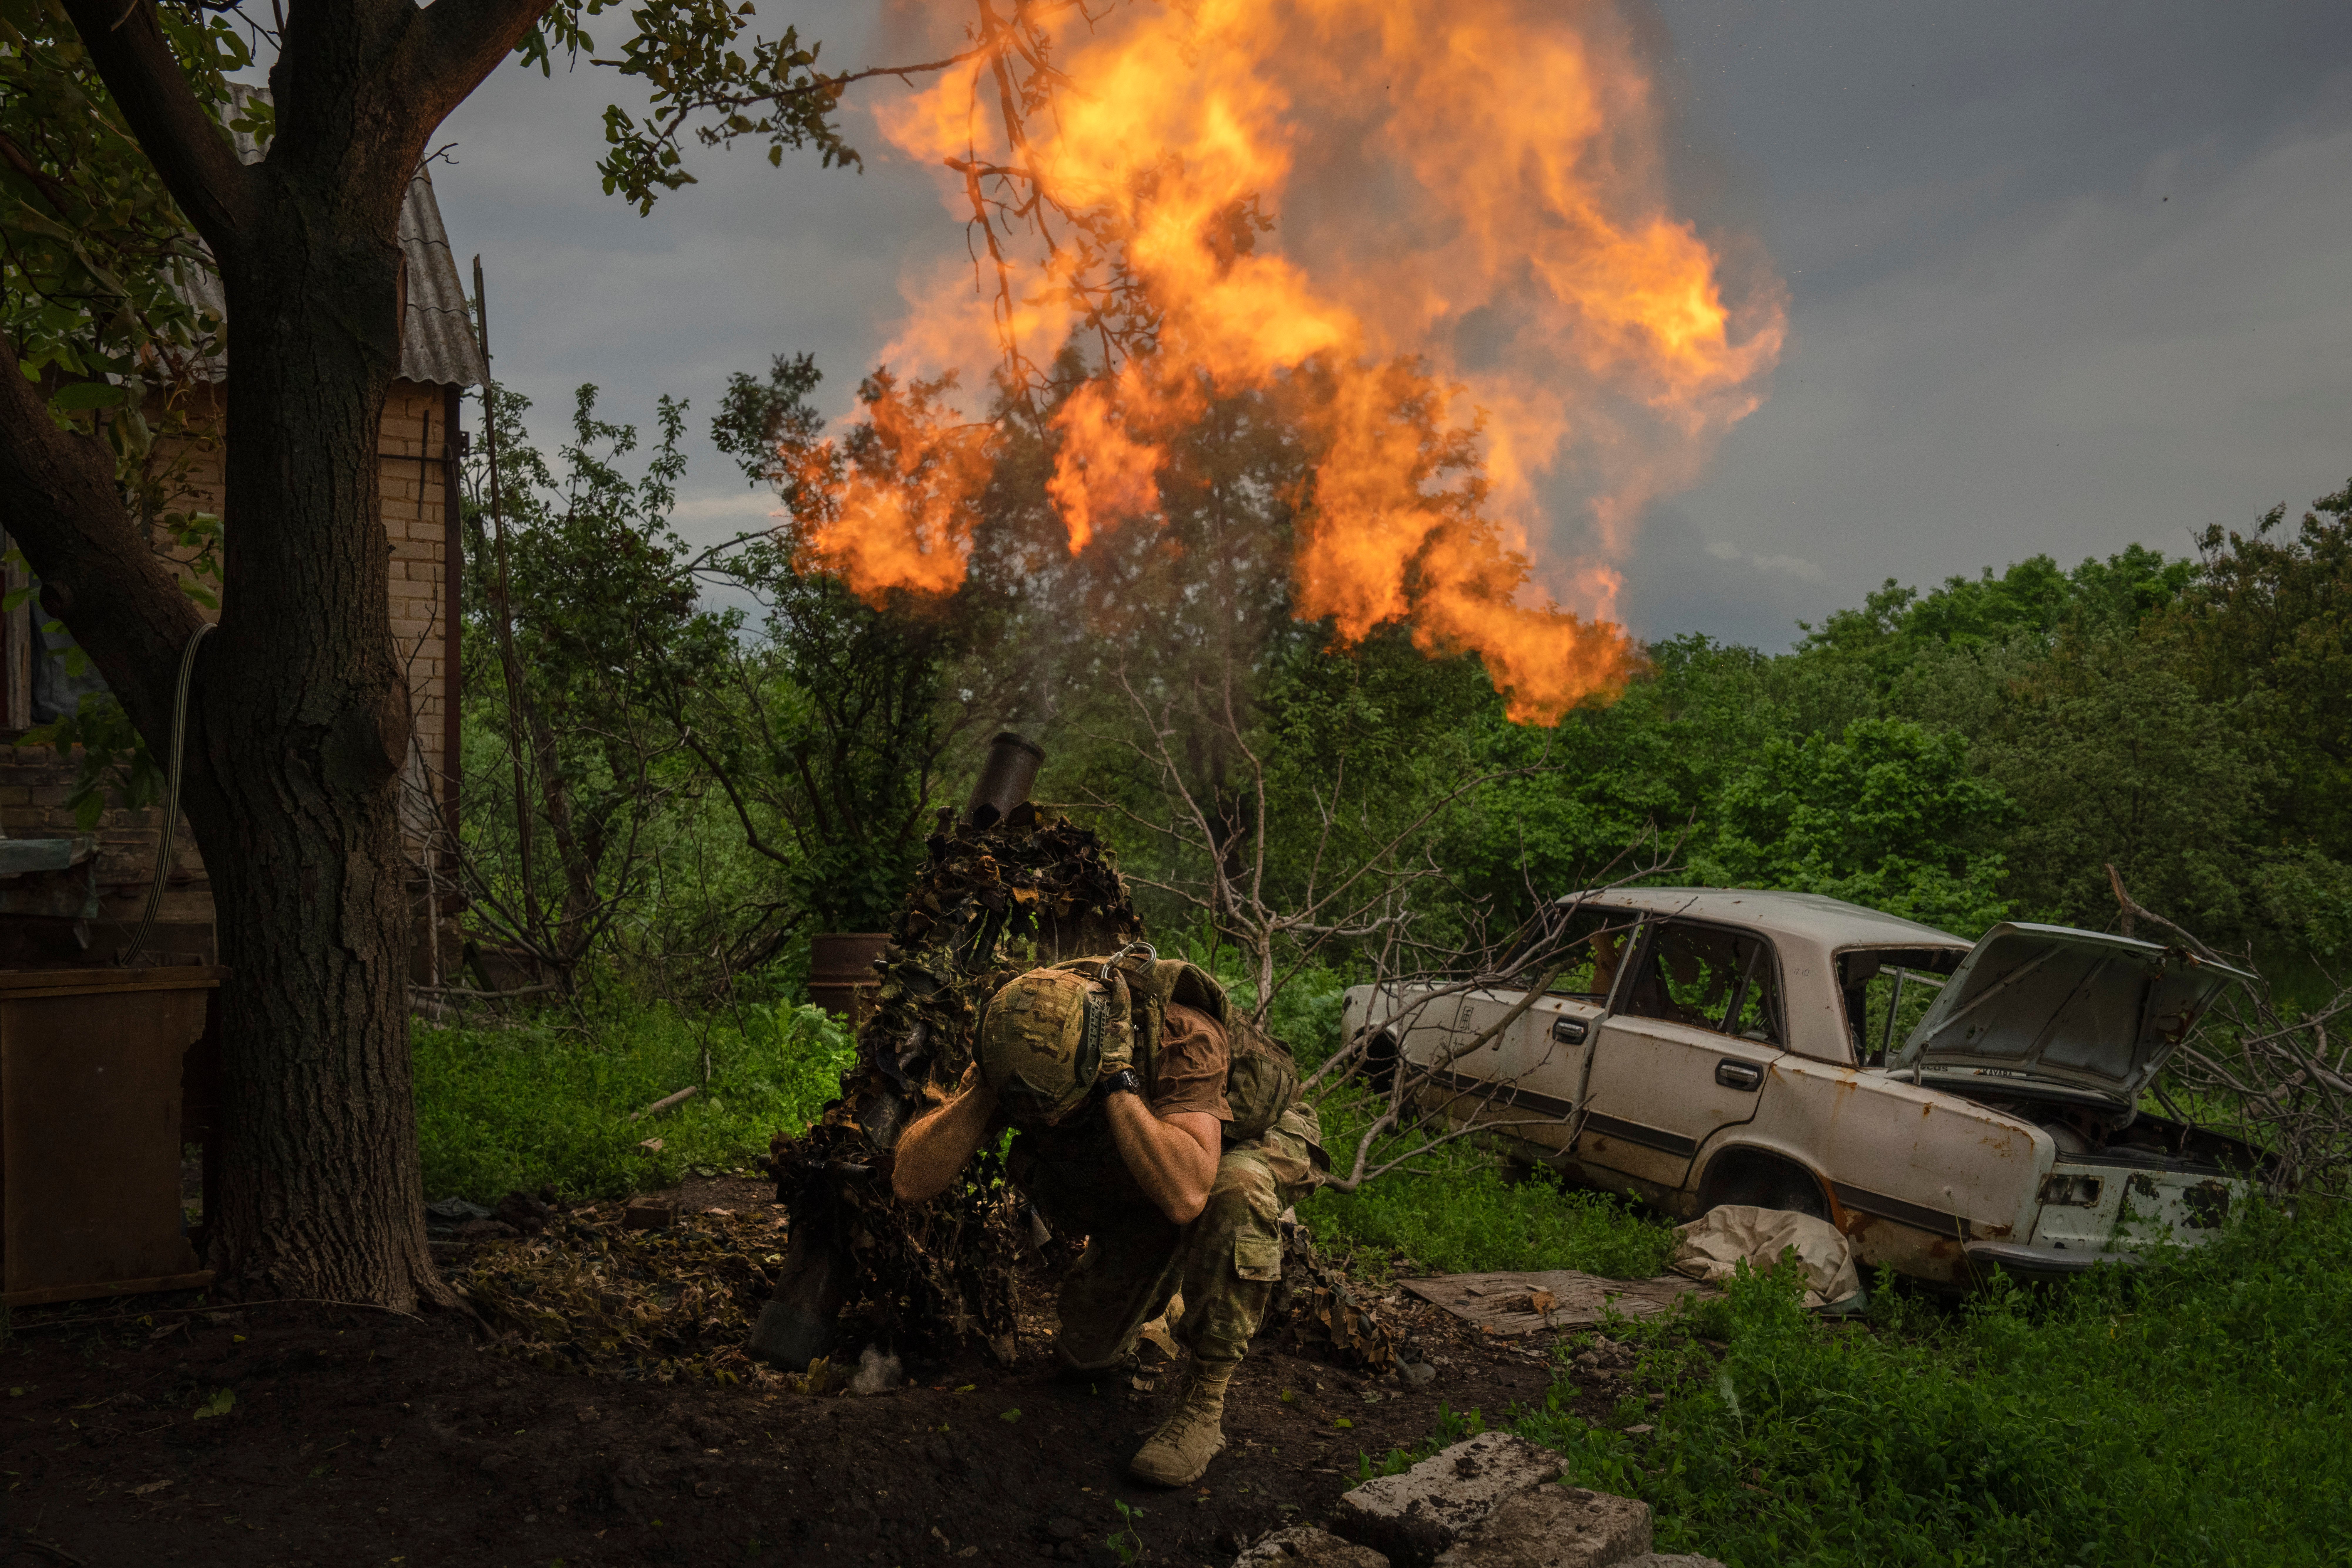 A Ukrainian soldier fires a mortar at Russian positions on the frontline in Donetsk